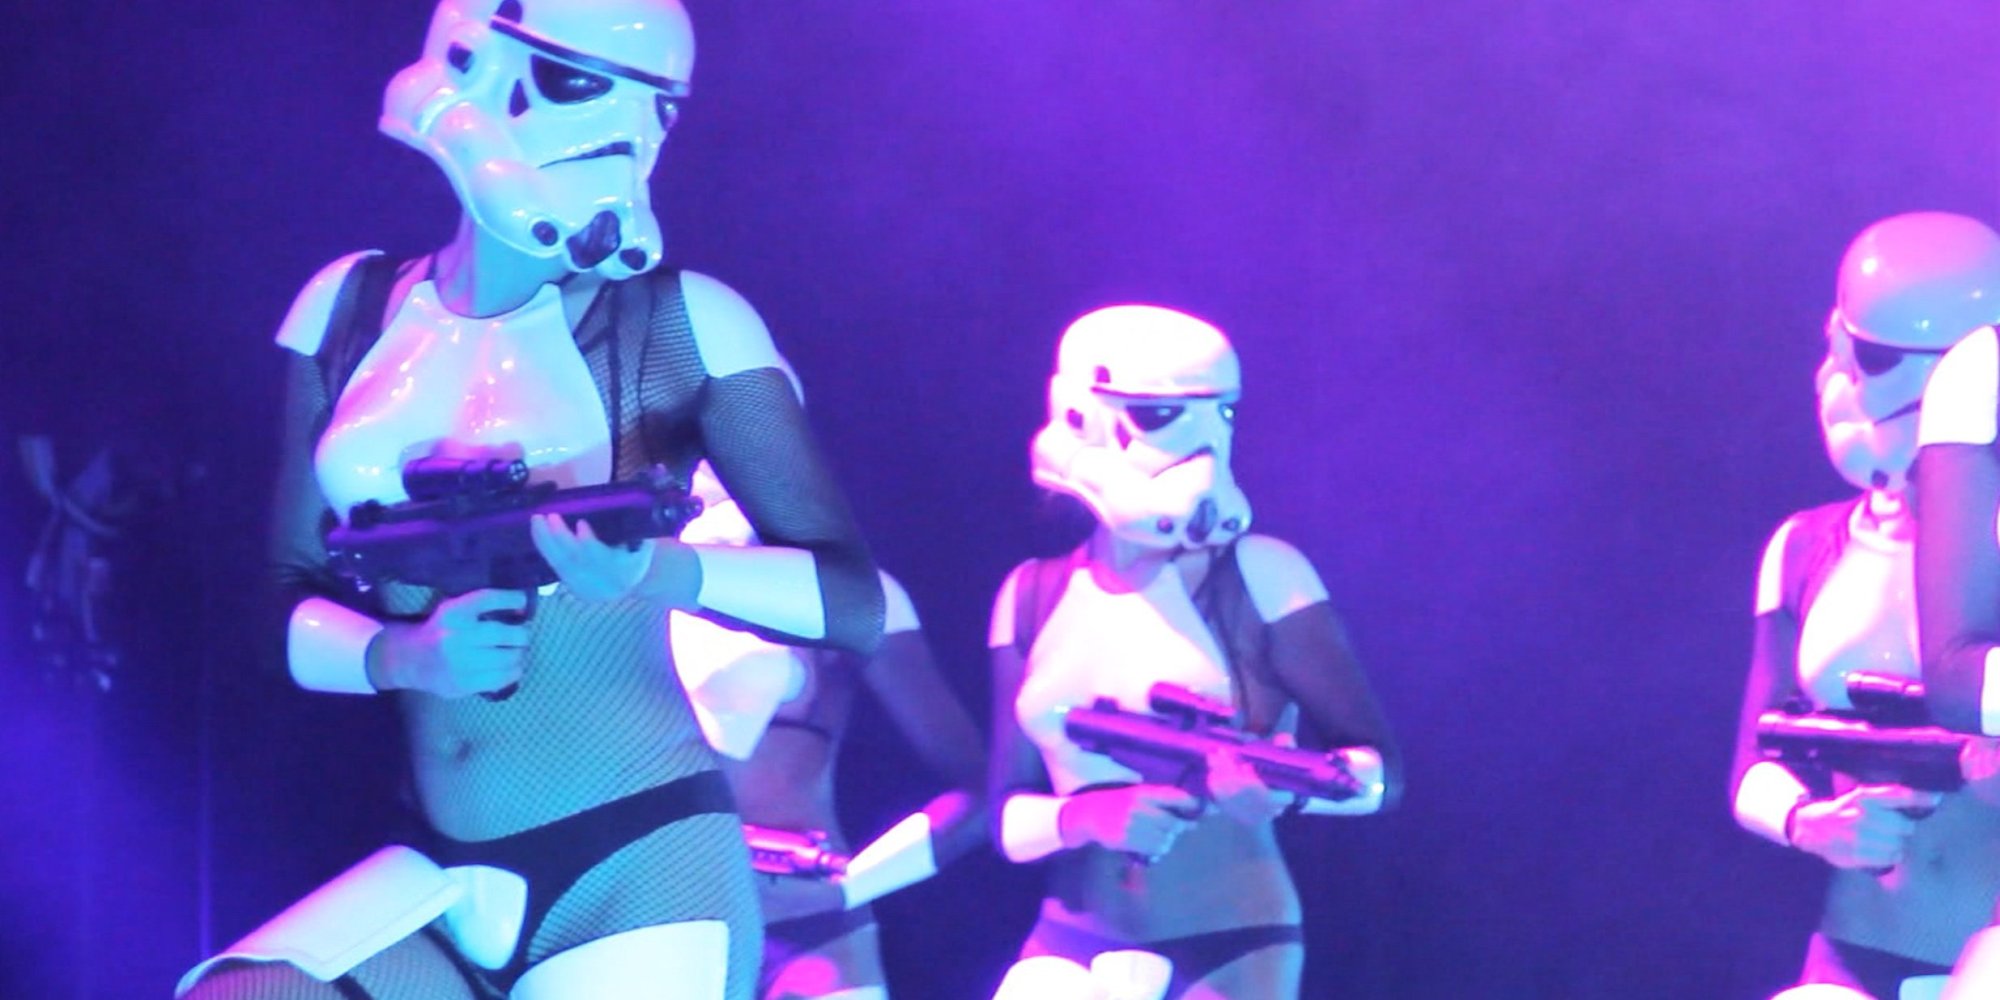 The Empire Strips Back A Star Wars Burlesque Parody The Huffington Post